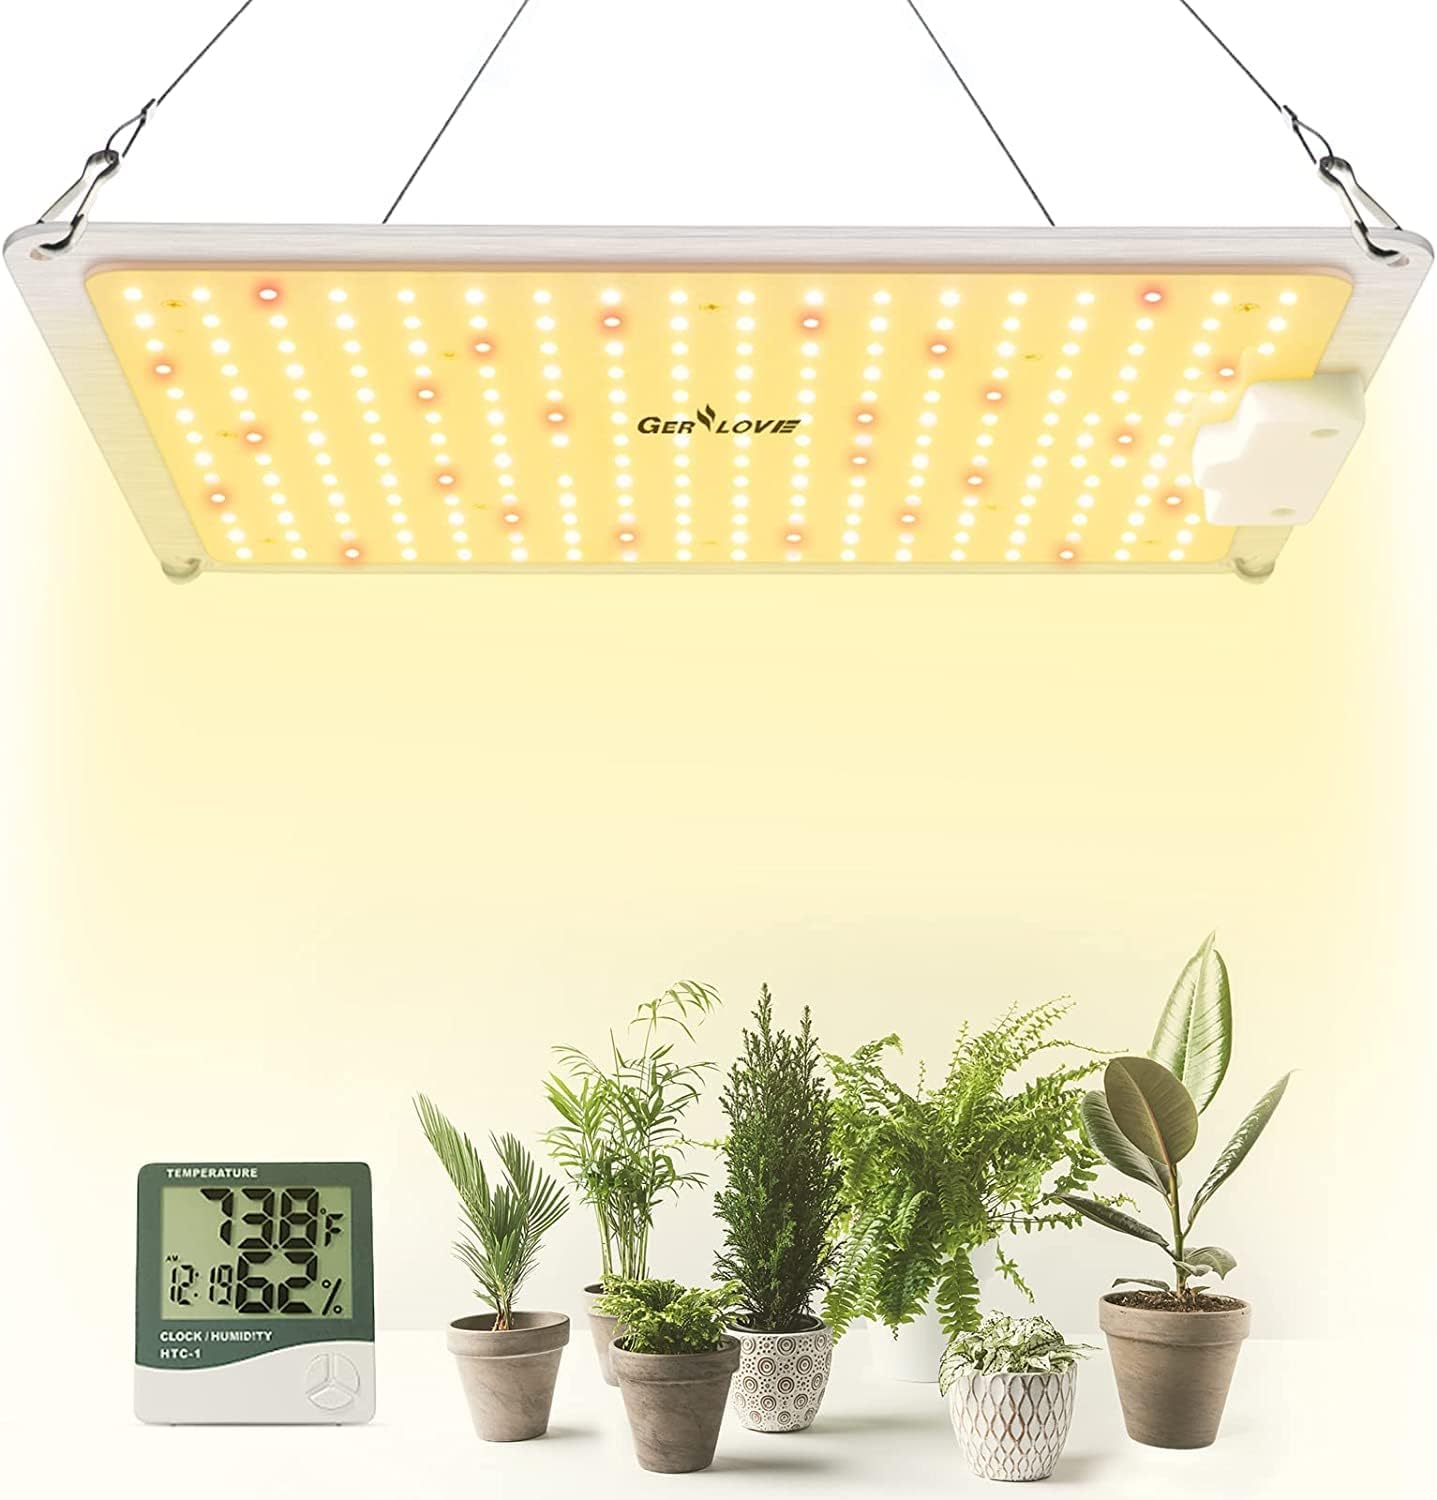 LED Grow Light, 1000W Full Spectrum Dimmable Plant Lights with Thermometer Humidity Monitor, Gerylove Growing Lamps for Indoor Plants Veg Bloom Seedlings 2x2/3x3 Grow Tent : Patio, Lawn  Garden